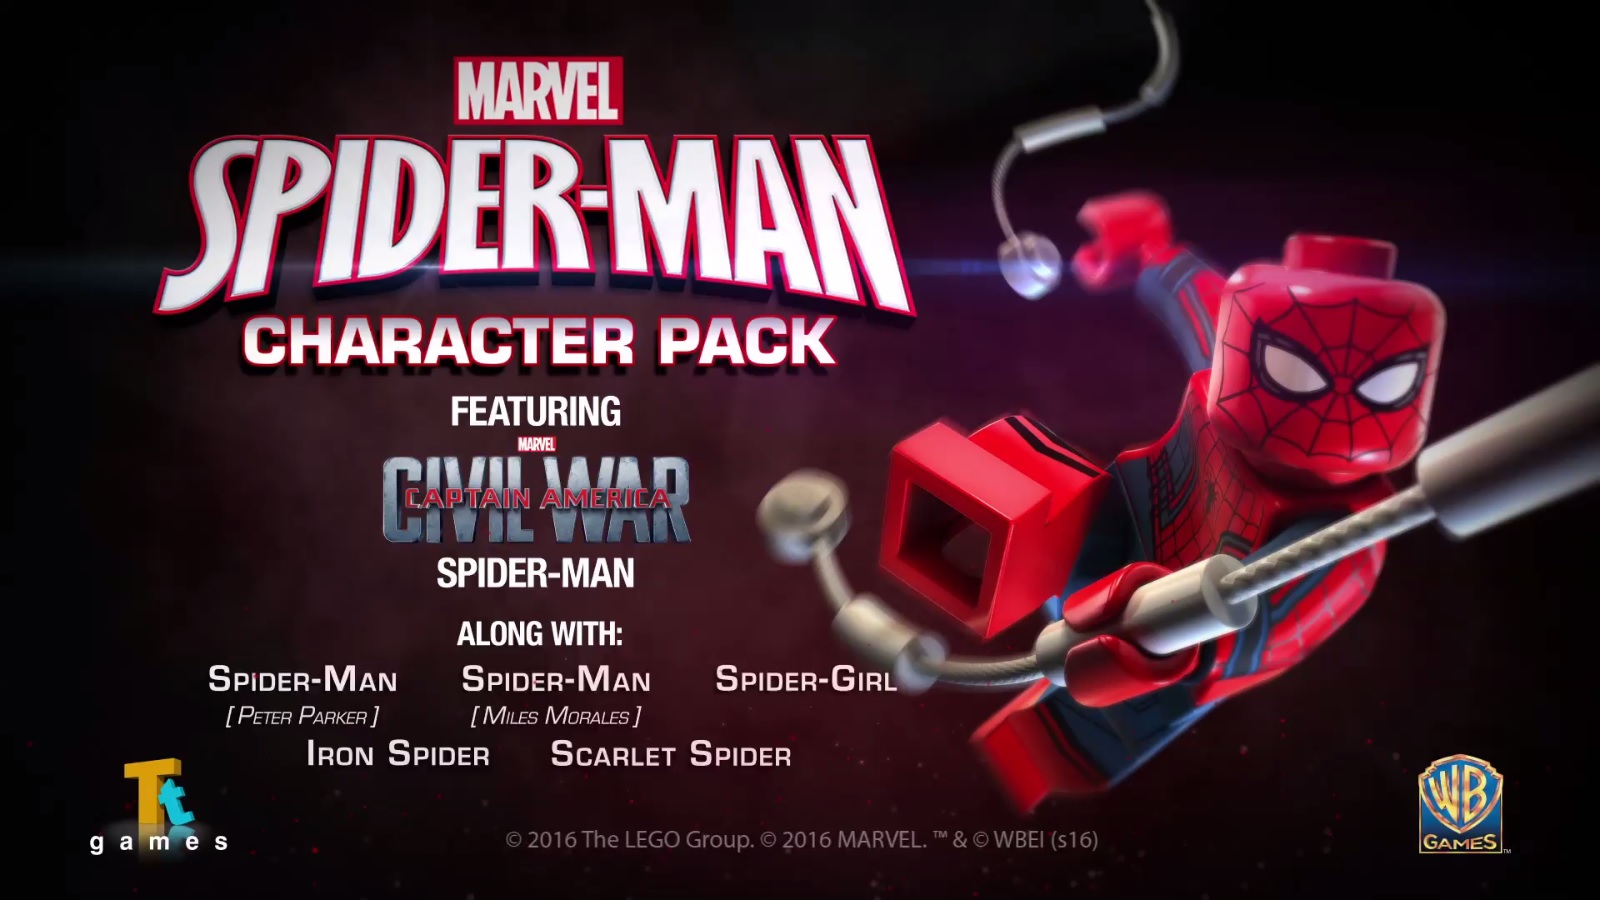 Spider-Man Character Pack out today for LEGO Marvel's Avengers